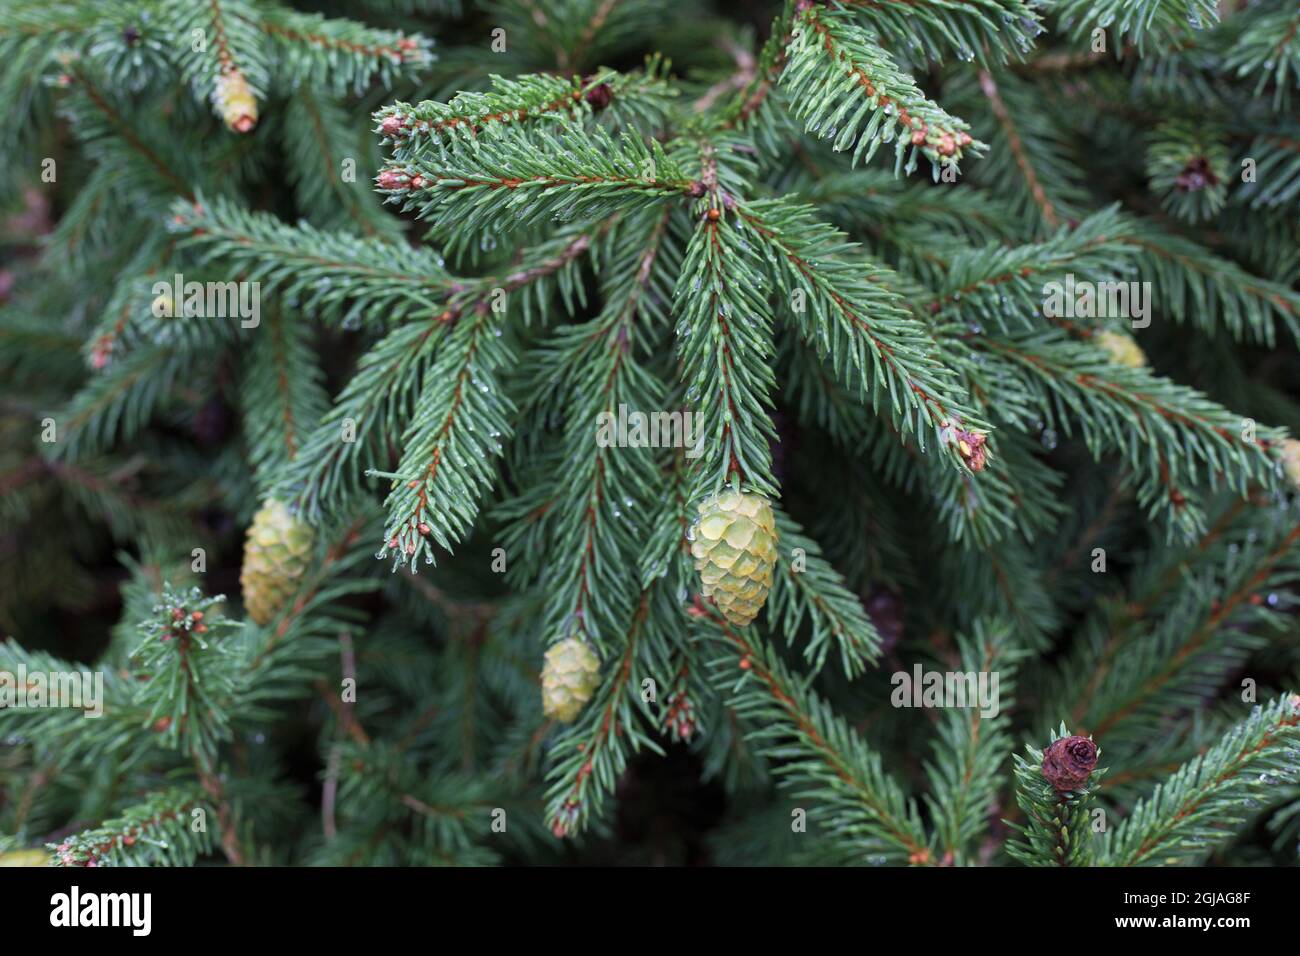 Picea abies 'Pusch'. Stock Photo